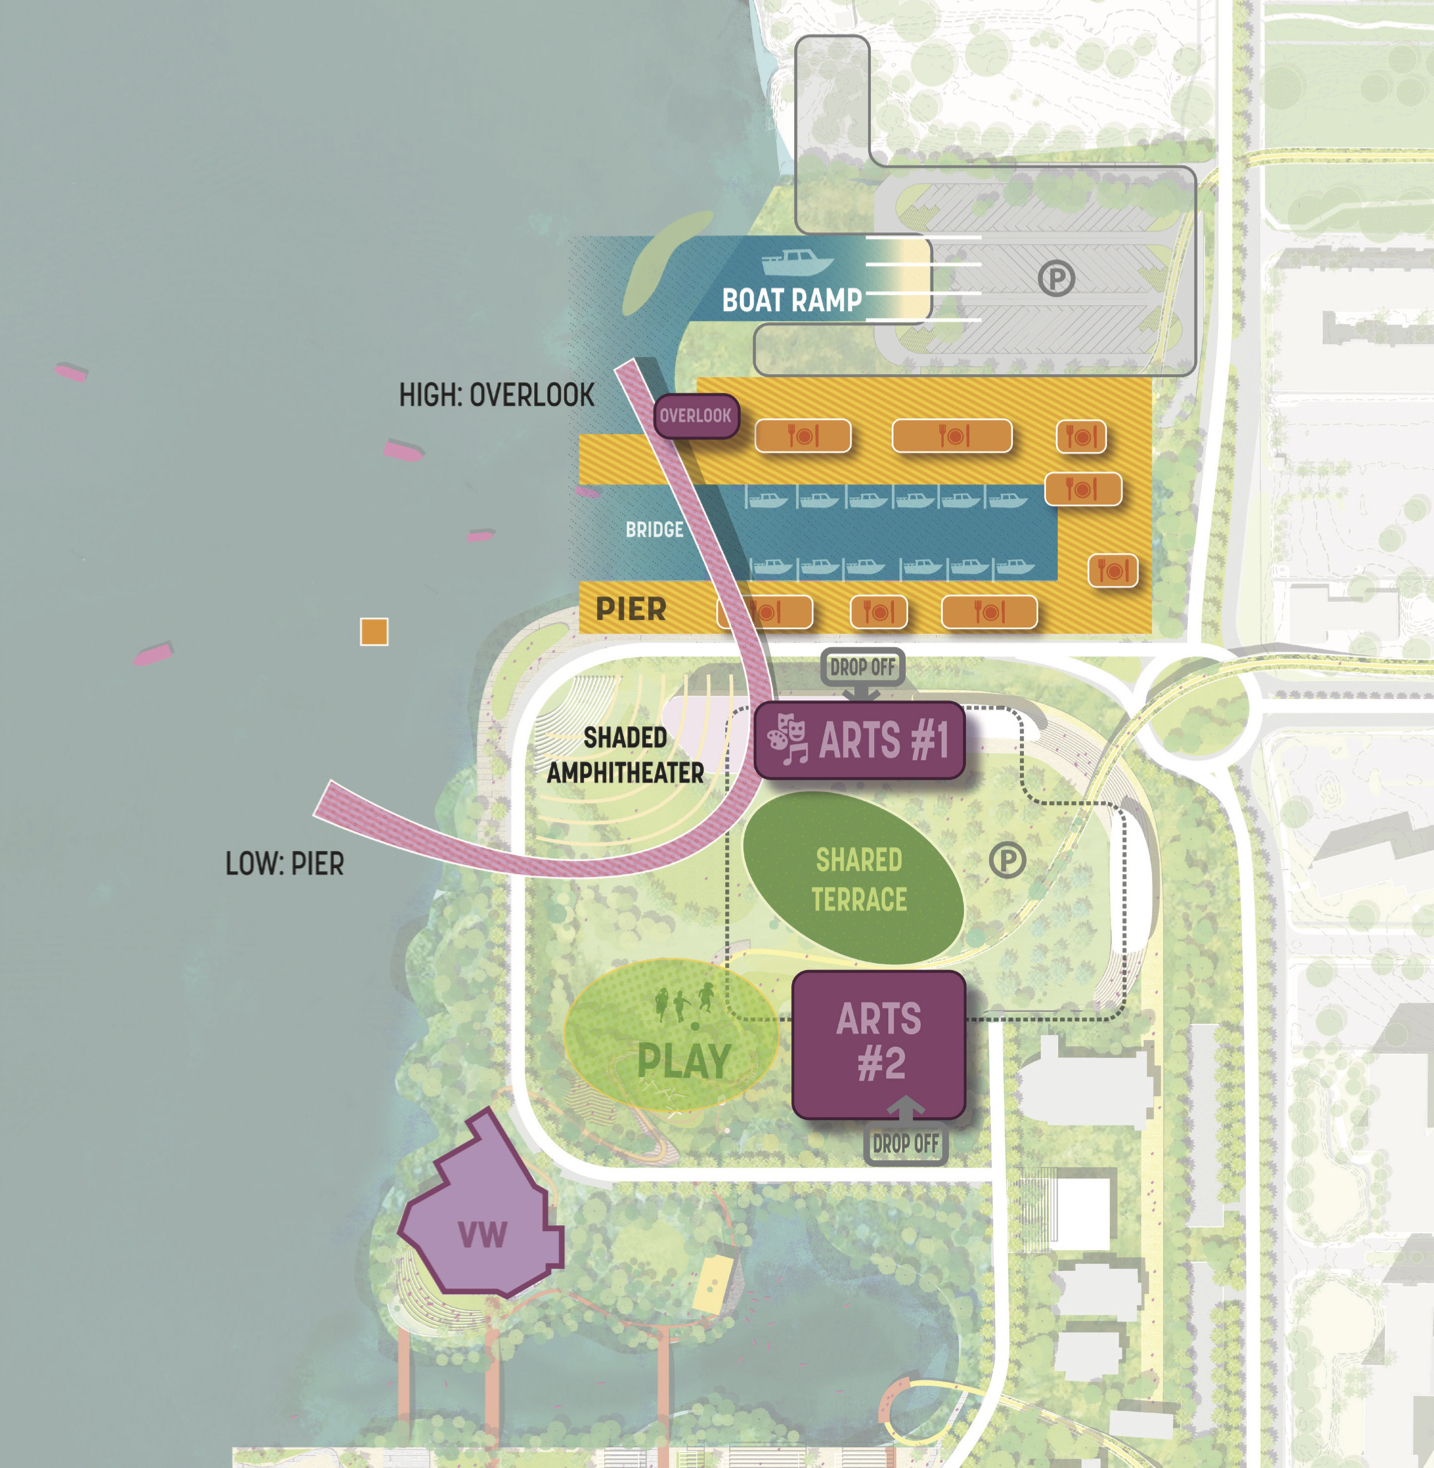 Based on survey results, The Bay is using the above concept as its preferred vision for the northern end of the bayfront site.